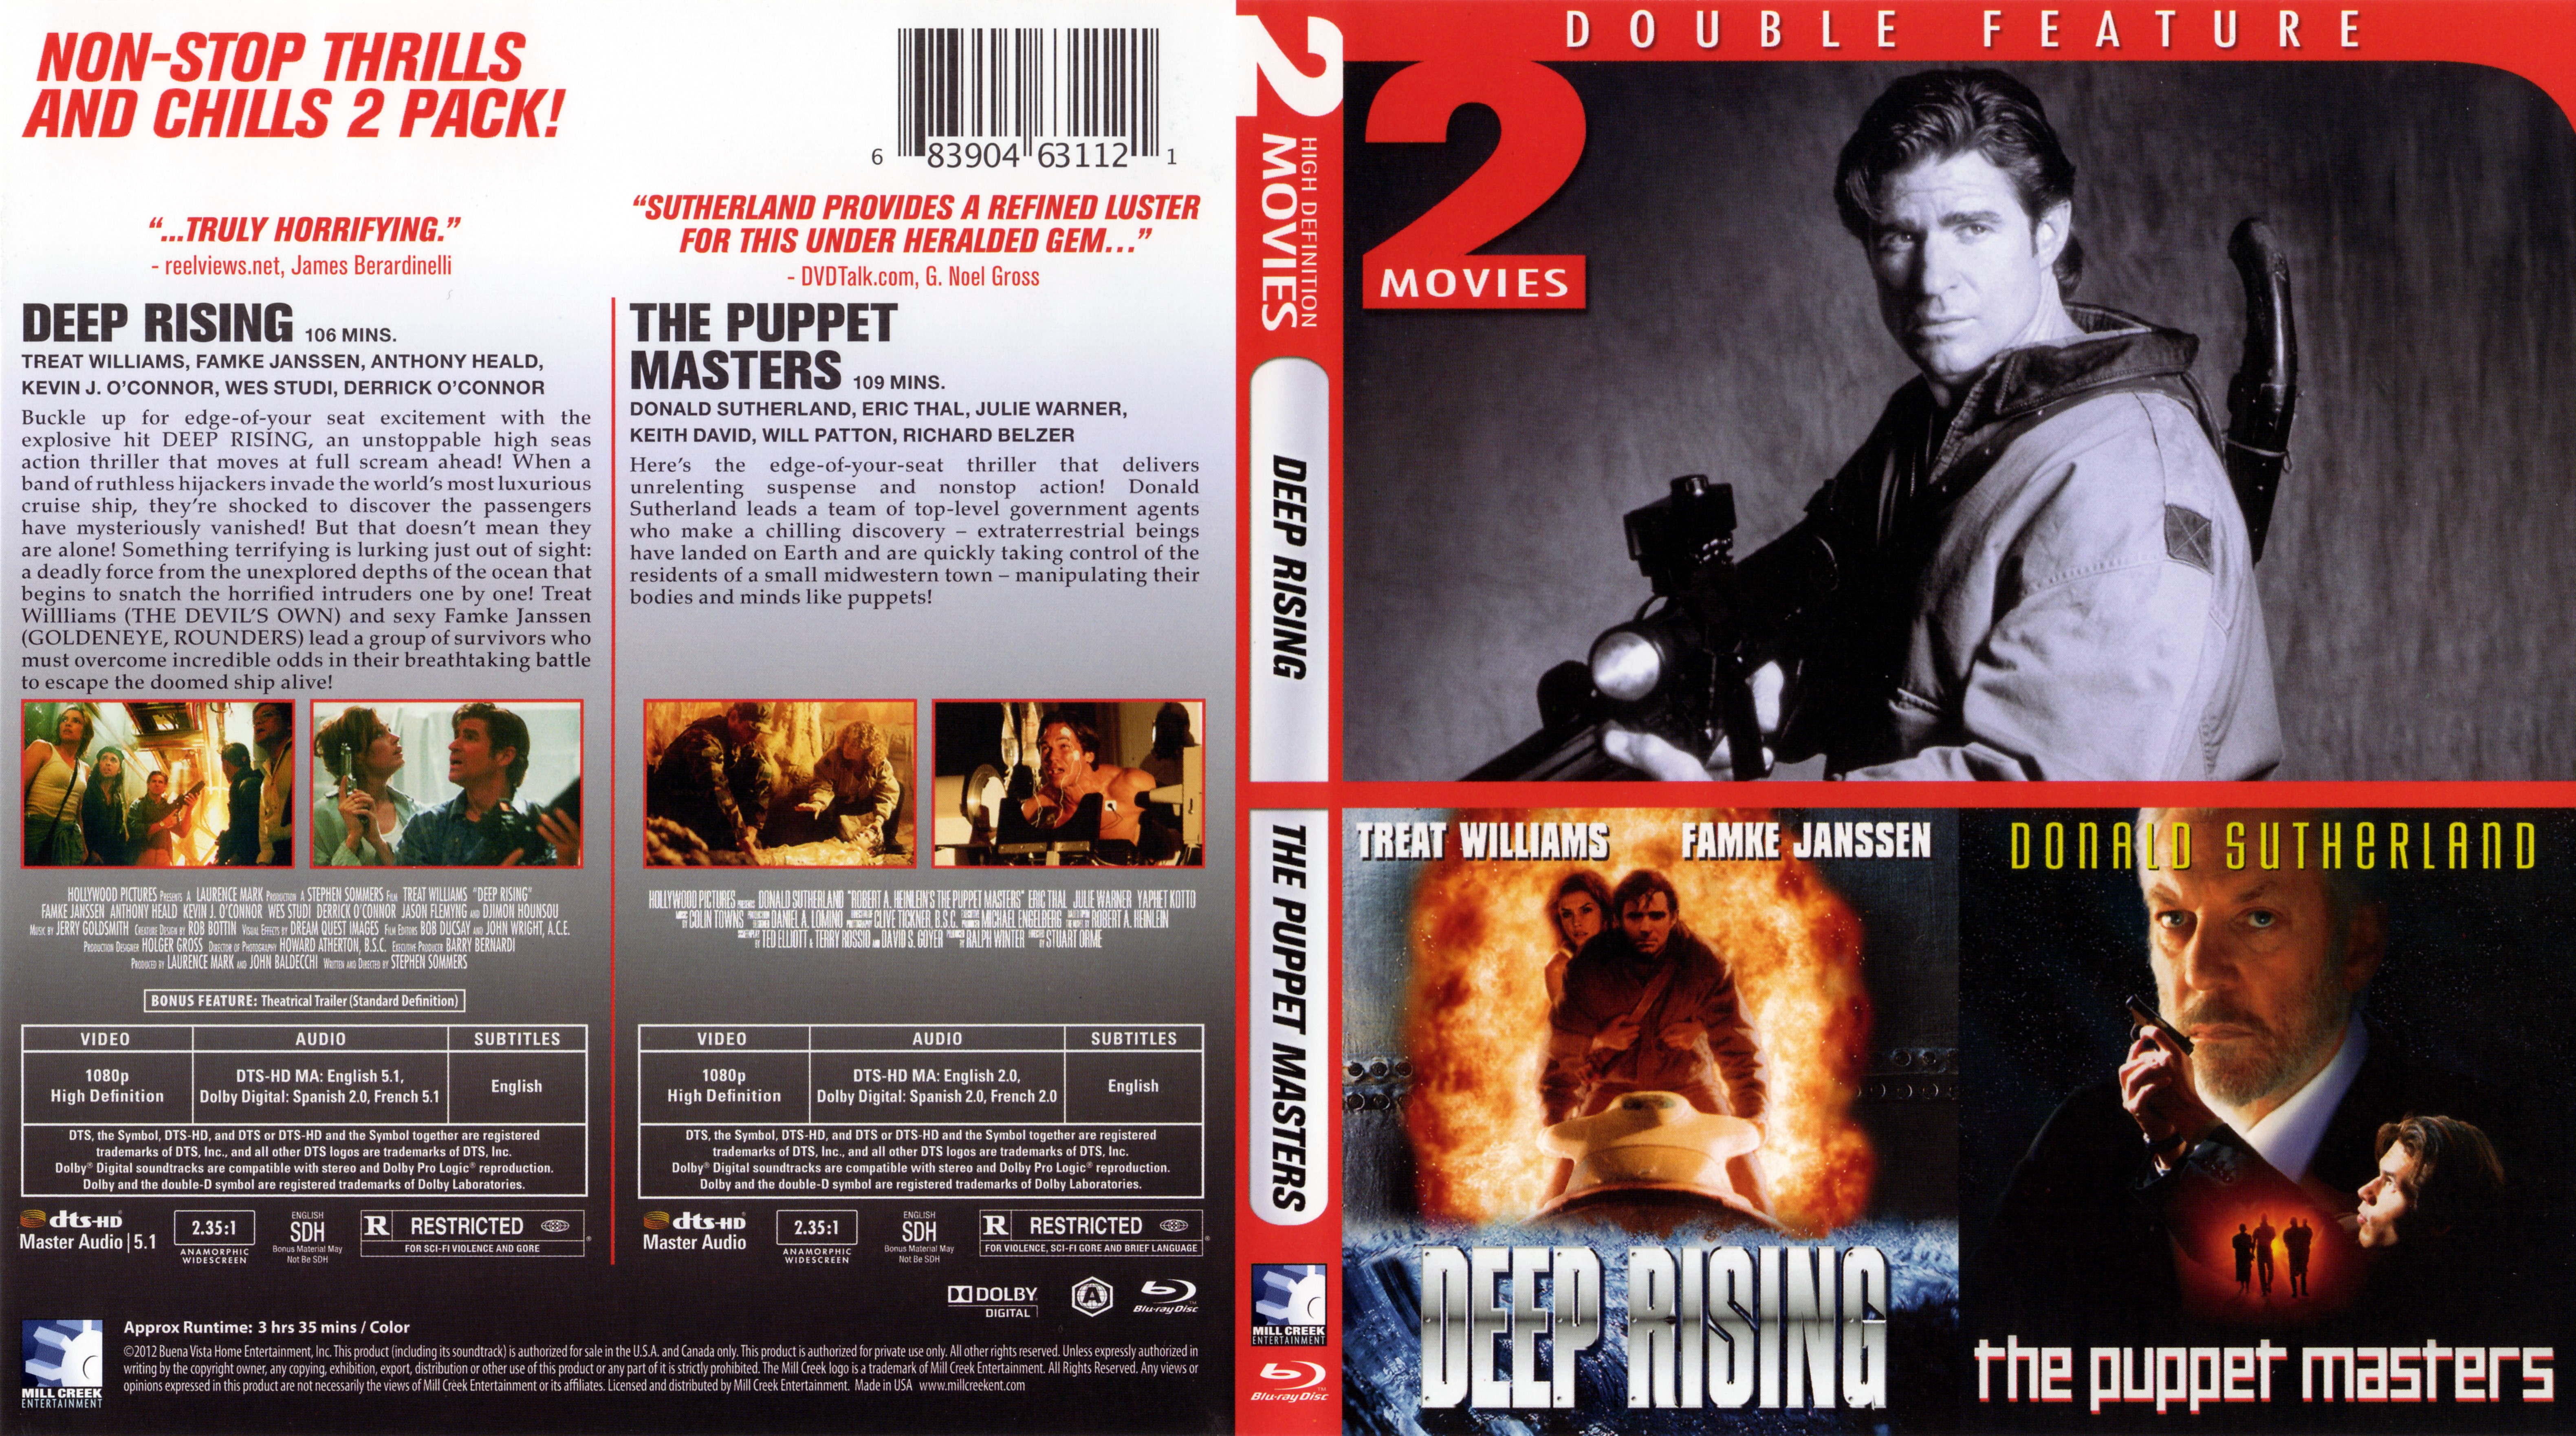 Jaquette DVD Deep rising + The puppet Masters Zone 1 (BLU-RAY)